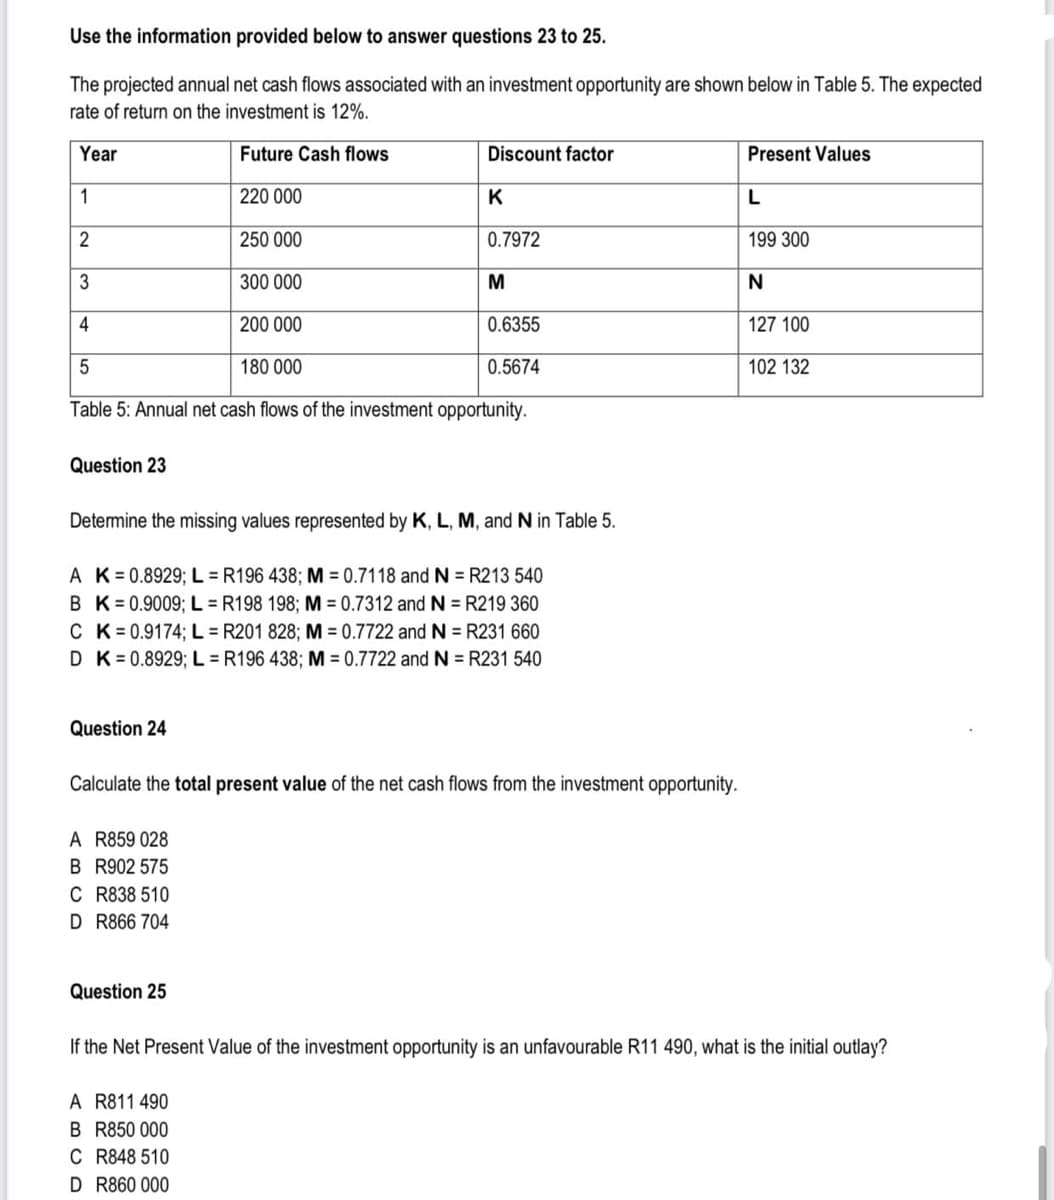 Use the information provided below to answer questions 23 to 25.
The projected annual net cash flows associated with an investment opportunity are shown below in Table 5. The expected
rate of return on the investment is 12%.
Year
1
220 000
250 000
300 000
200 000
5
180 000
Table 5: Annual net cash flows of the investment opportunity.
2
3
4
Question 23
Question 24
Future Cash flows
A R859 028
B R902 575
C R838 510
D
R866 704
Discount factor
Question 25
K
Determine the missing values represented by K, L, M, and N in Table 5.
A K = 0.8929; L = R196 438; M = 0.7118 and N = R213 540
BK = 0.9009; L = R198 198; M = 0.7312 and N = R219 360
C K=0.9174; L = R201 828; M = 0.7722 and N = R231 660
D K = 0.8929; L = R196 438; M = 0.7722 and N = R231 540
A R811 490
B R850 000
C R848 510
D R860 000
0.7972
M
Calculate the total present value of the net cash flows from the investment opportunity.
0.6355
0.5674
Present Values
L
199 300
N
127 100
102 132
If the Net Present Value of the investment opportunity is an unfavourable R11 490, what is the initial outlay?